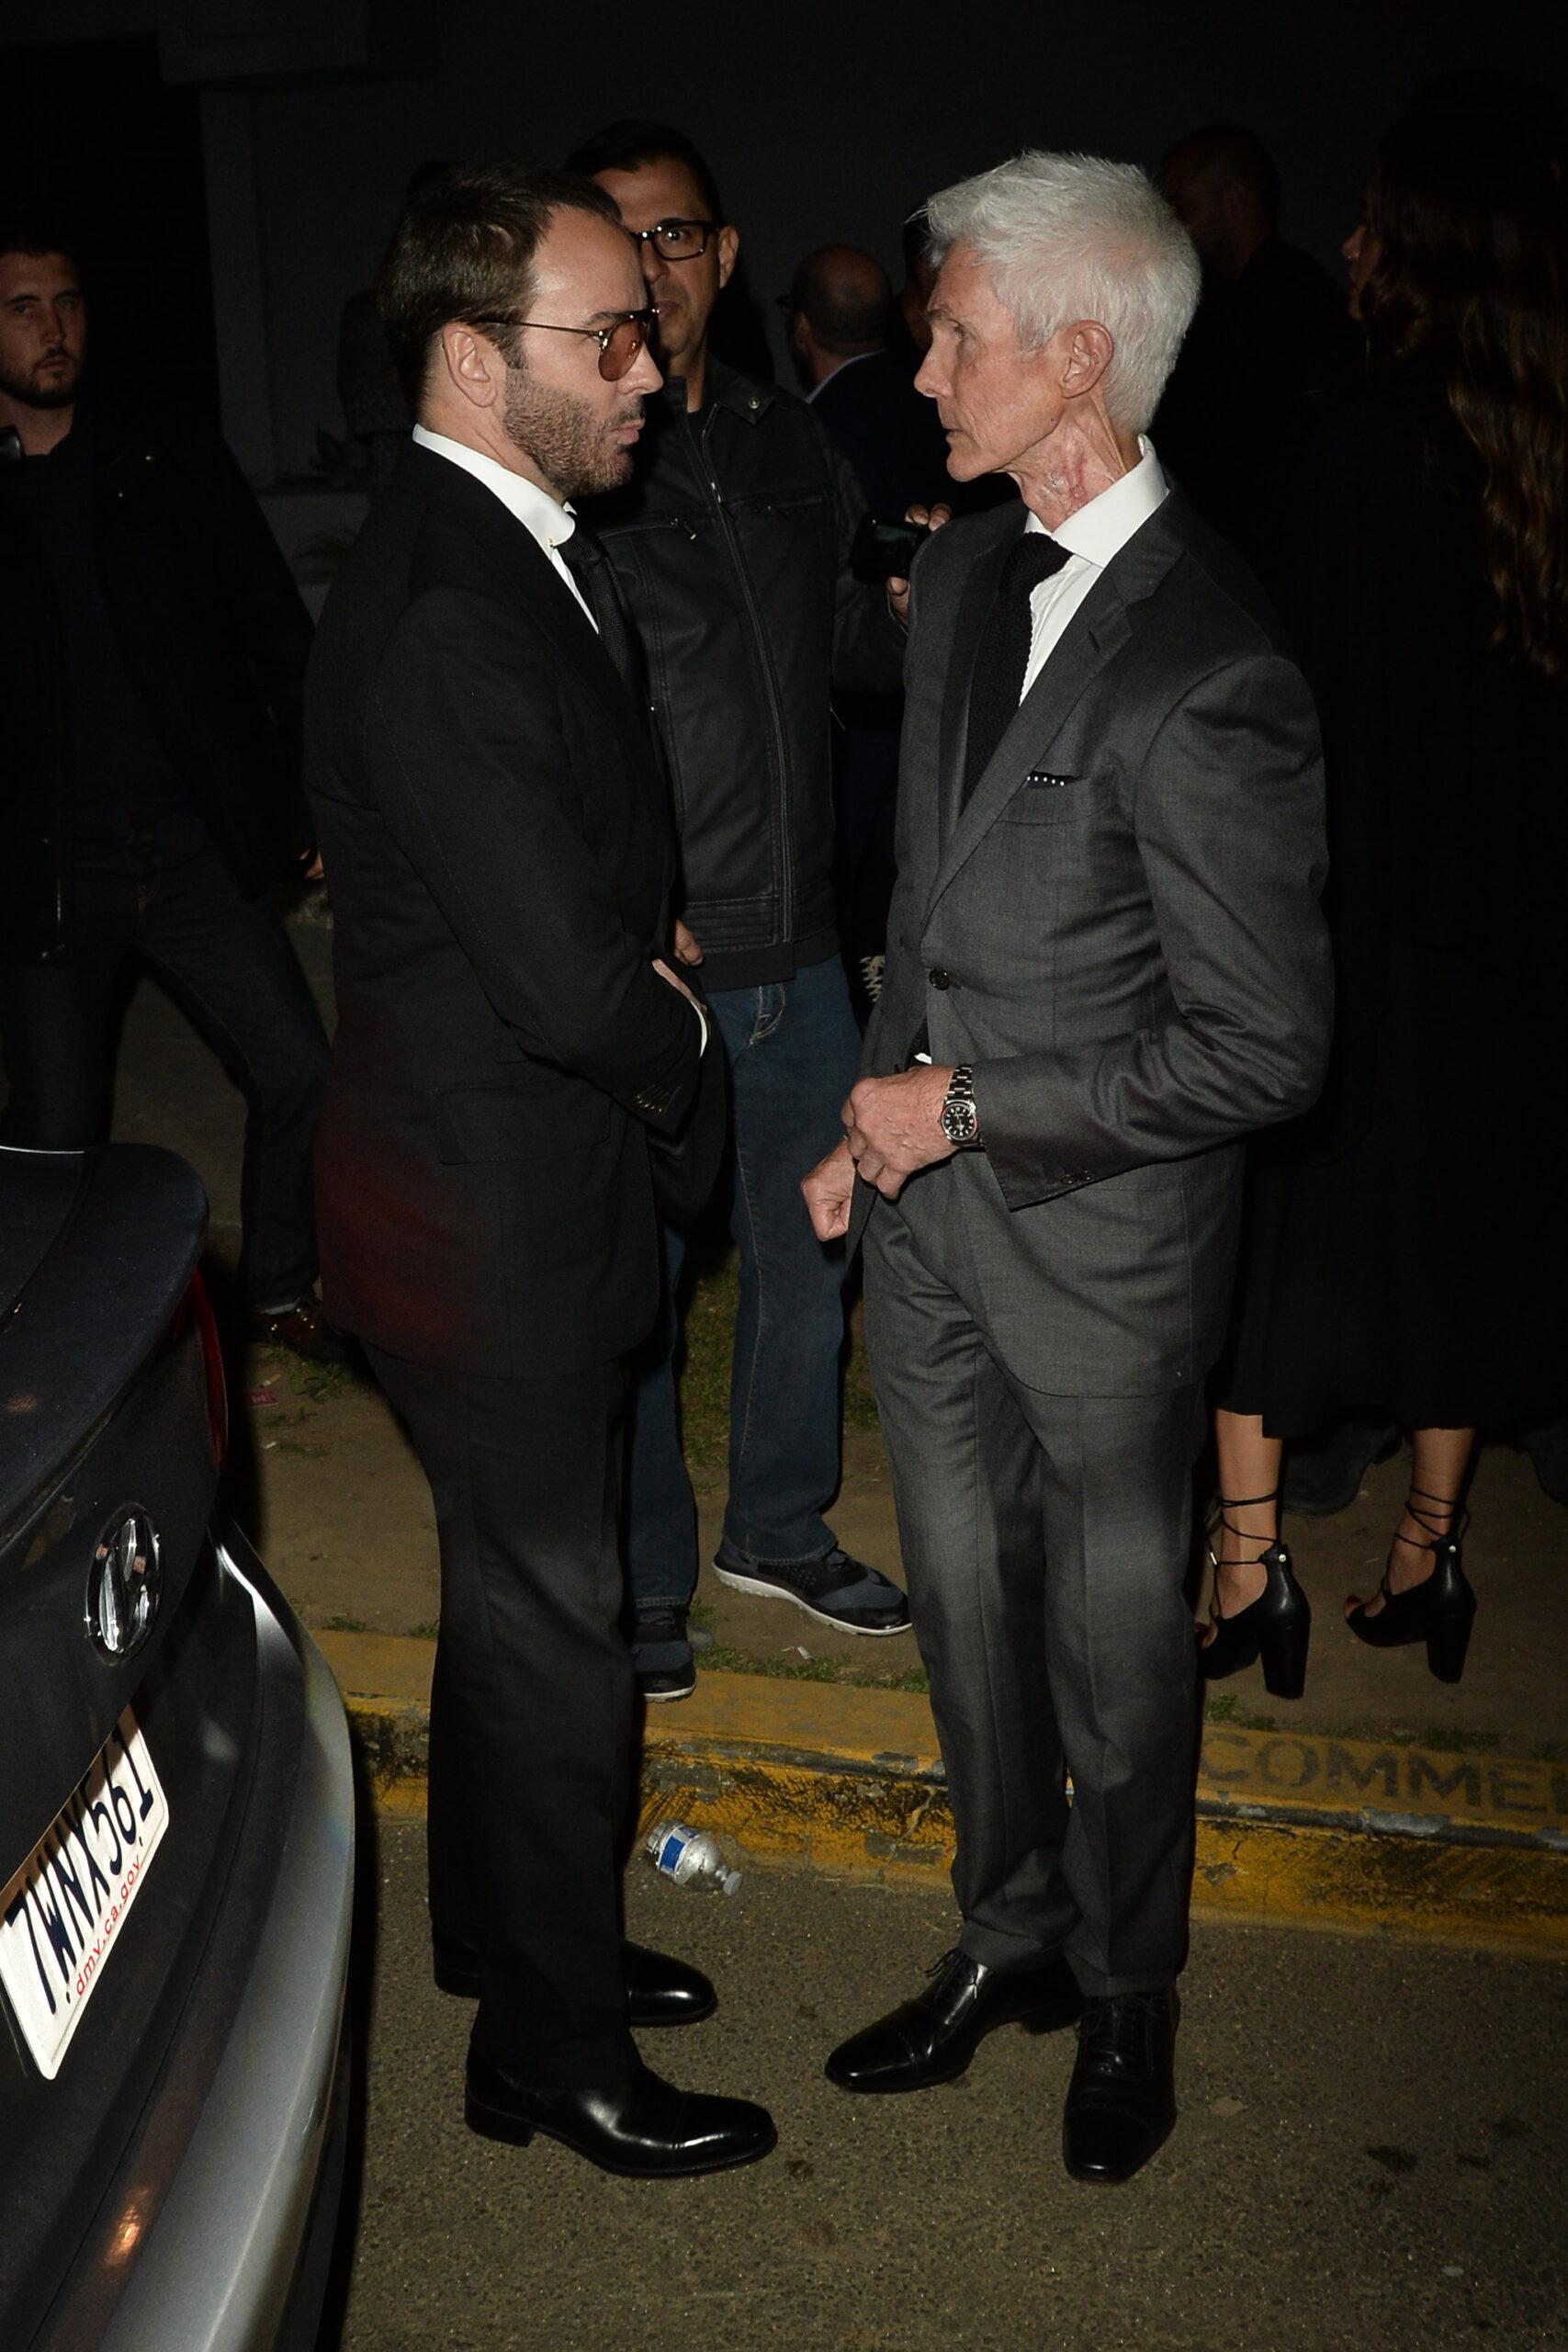 Tom Ford and Richard Buckley Attends Elton John's 70th Birthday Party